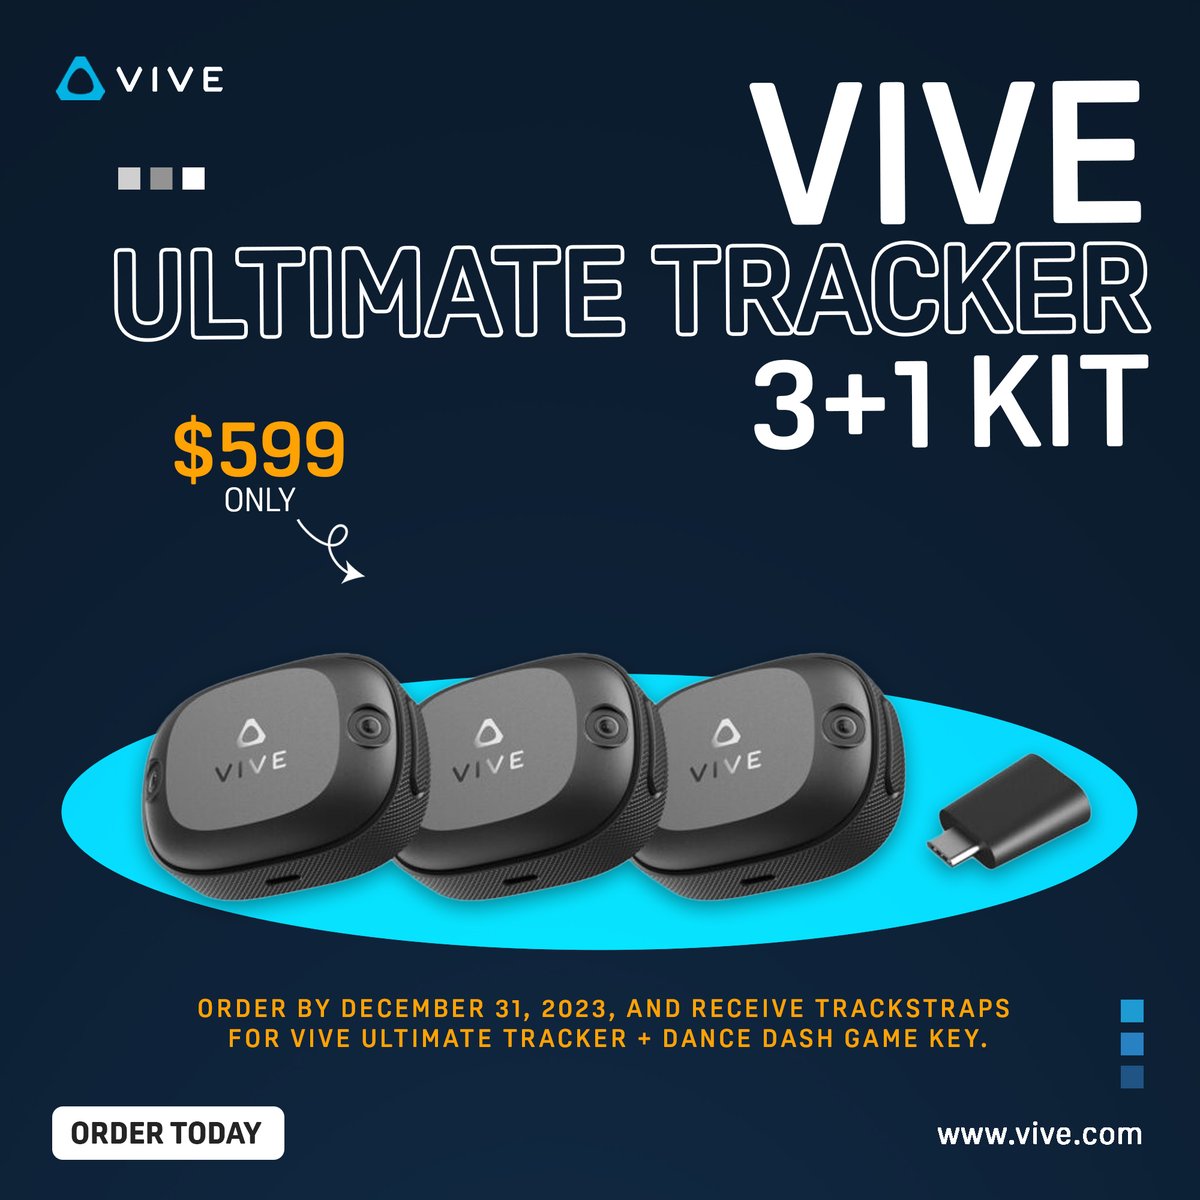 Discover the excitement of 6-point inside out tracking with your standalone VR headset: htcvive.co/VUTX #VR #VIRTUALREALITY #VRTRACKER #VRACCESSORIES #MOTIONTRACKING #MOTIONTRACKER #BODYTRACKING #OBJECTTRACKING #PRECISIONTRACKING